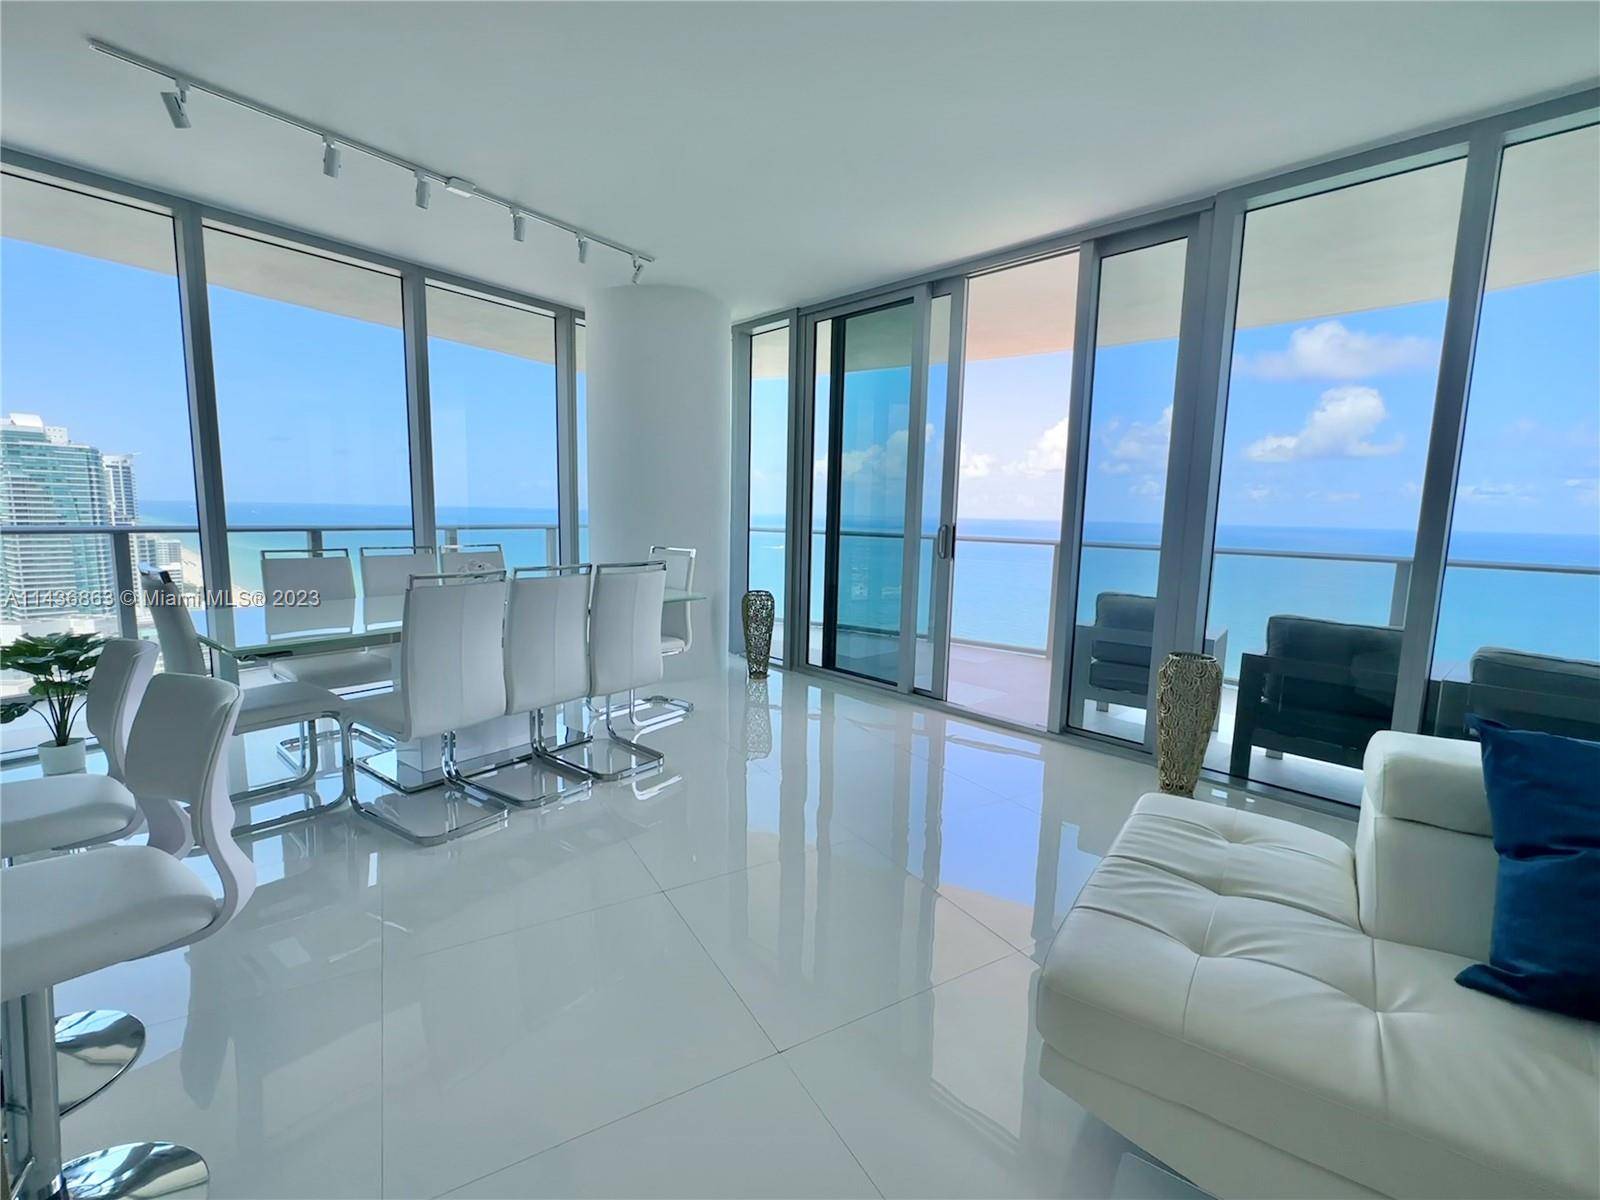 This luxurious Florida condo has unbeatable 180 degree direct ocean views with a great size rounded terrace to match.